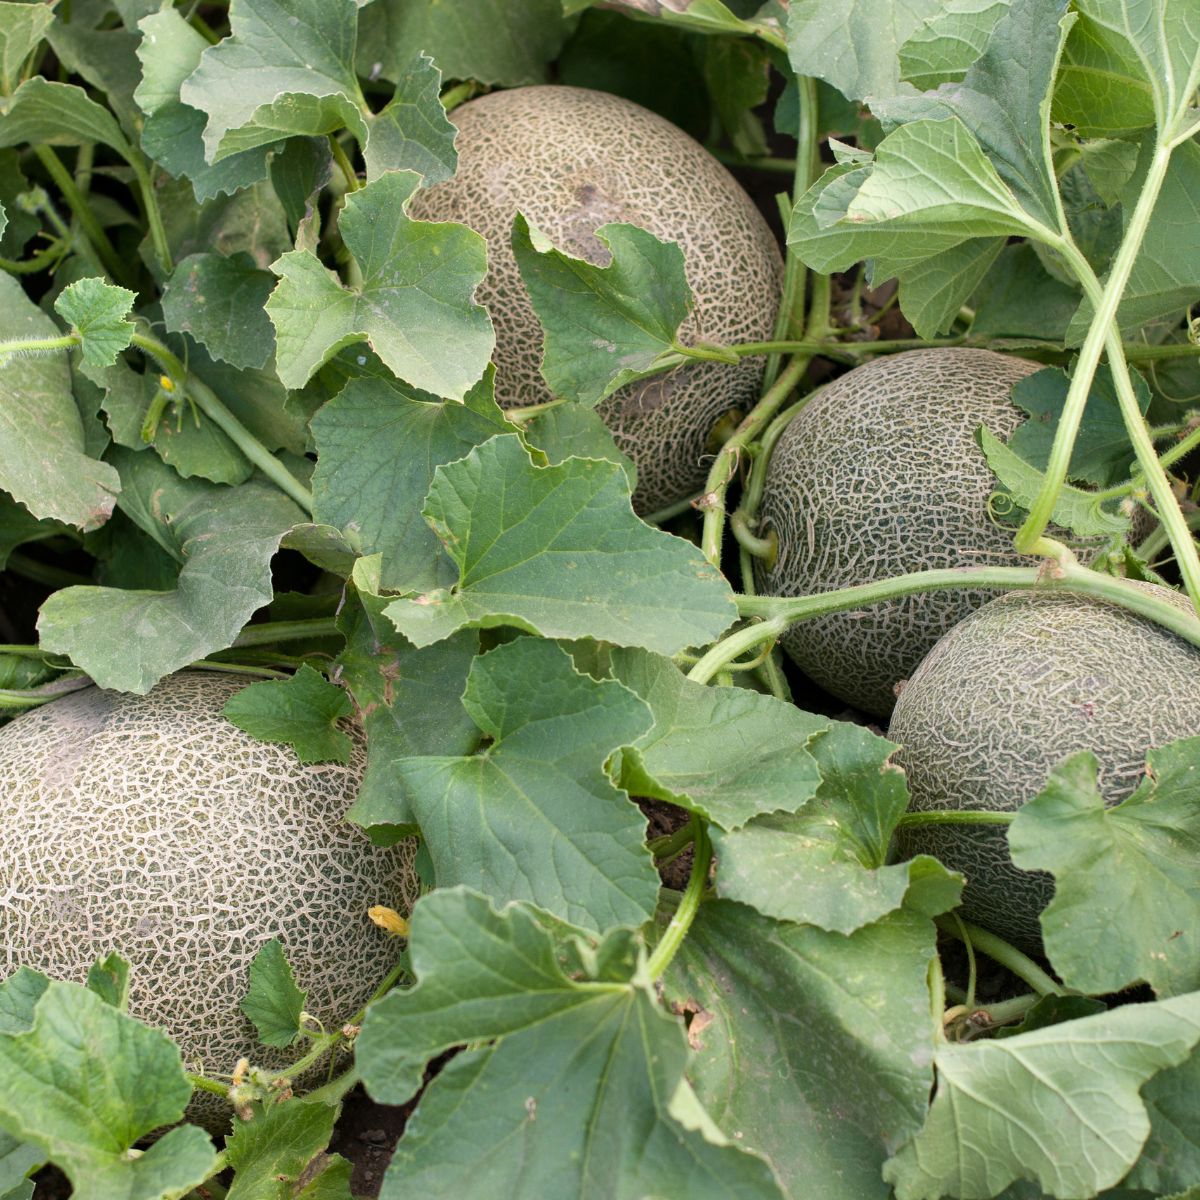 melons in the garden